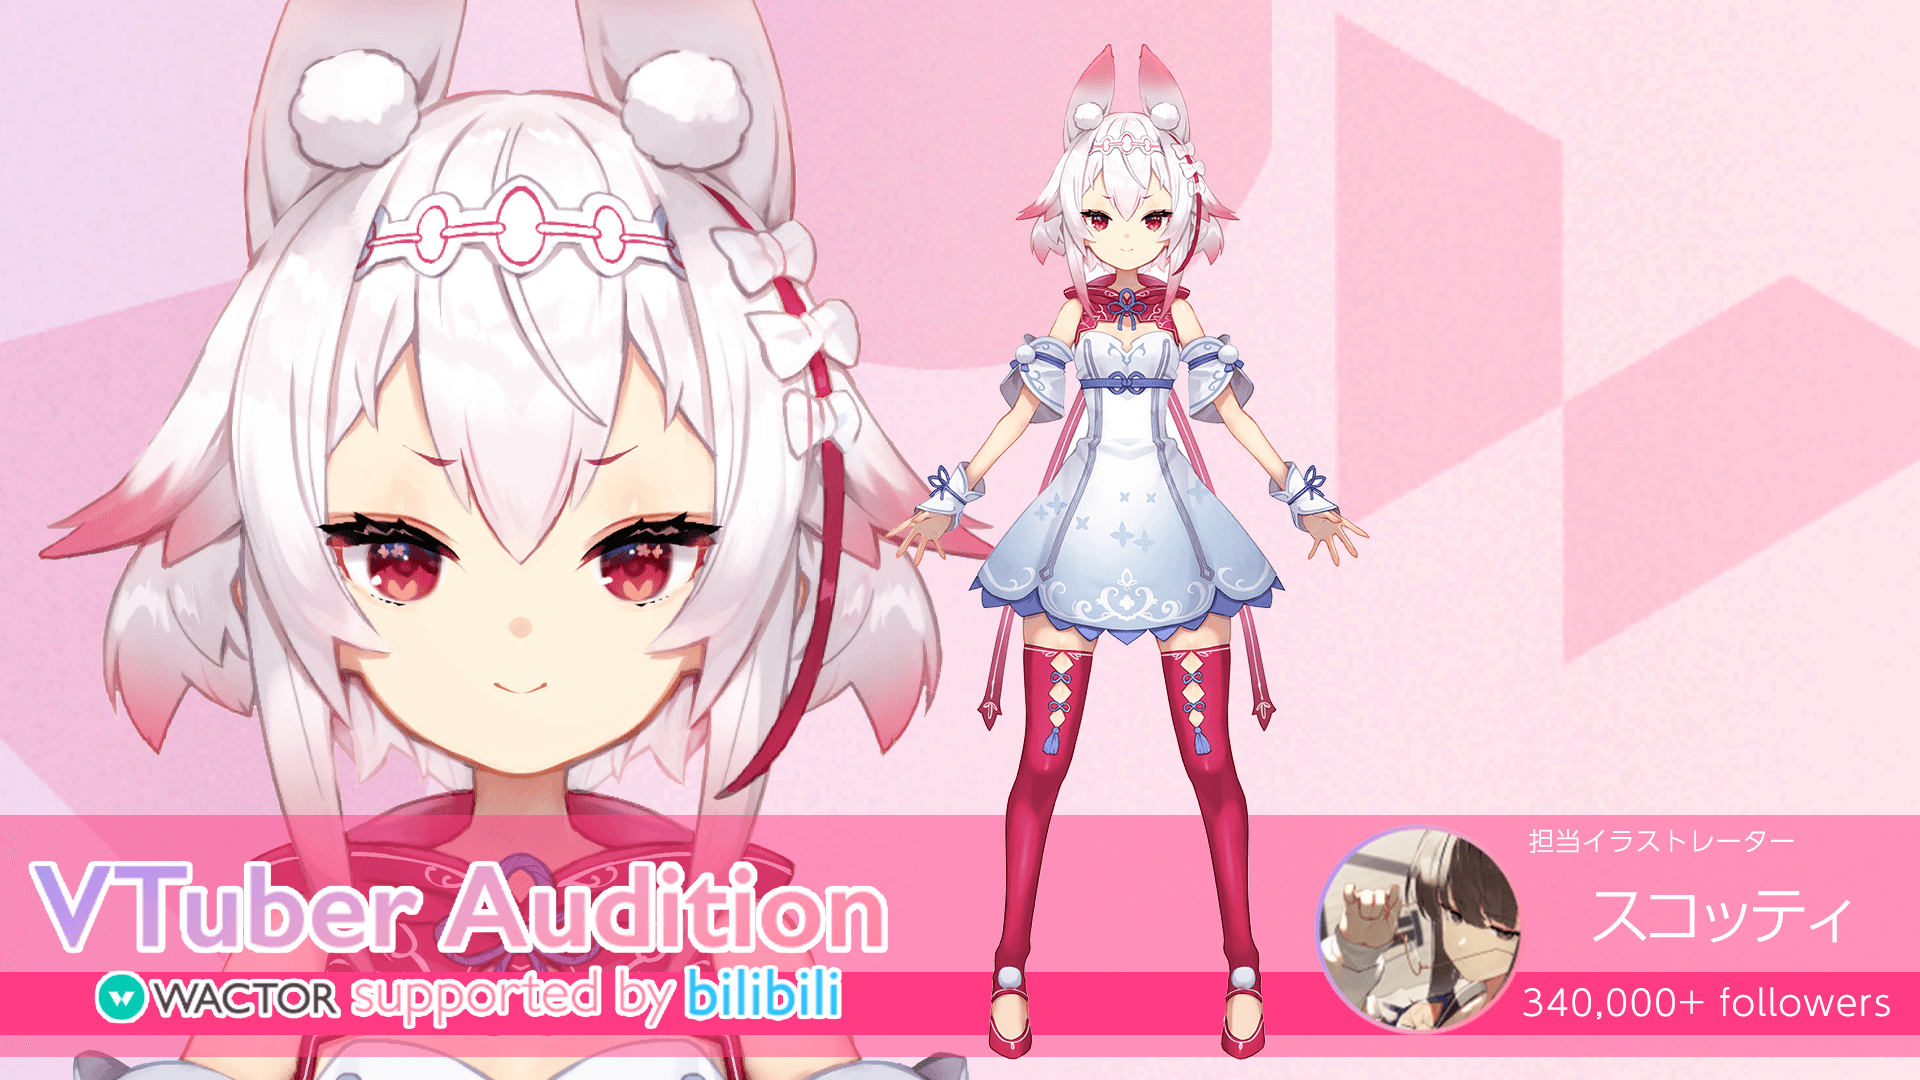 WACTOR VTuber Audition supported by bilibili (6)